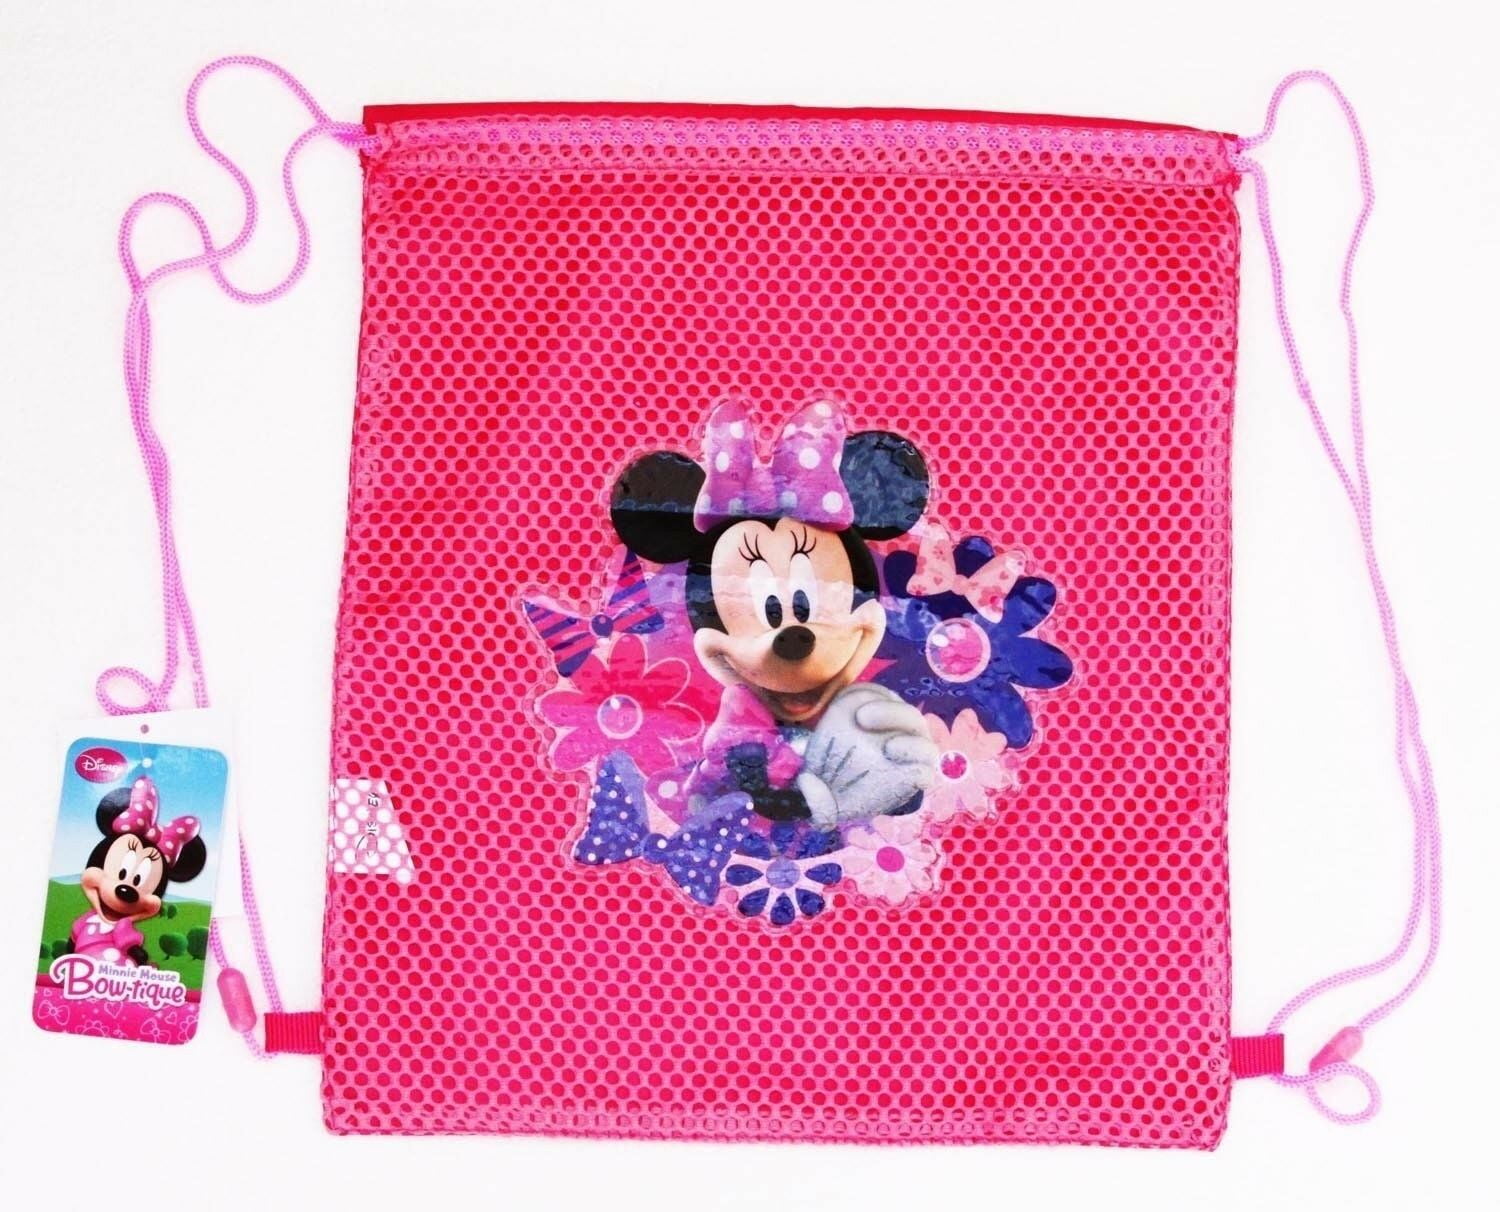 Gym Backpack Purse NWT Disney Minnie Mouse Drawstring Bag Paris Style on the Go 